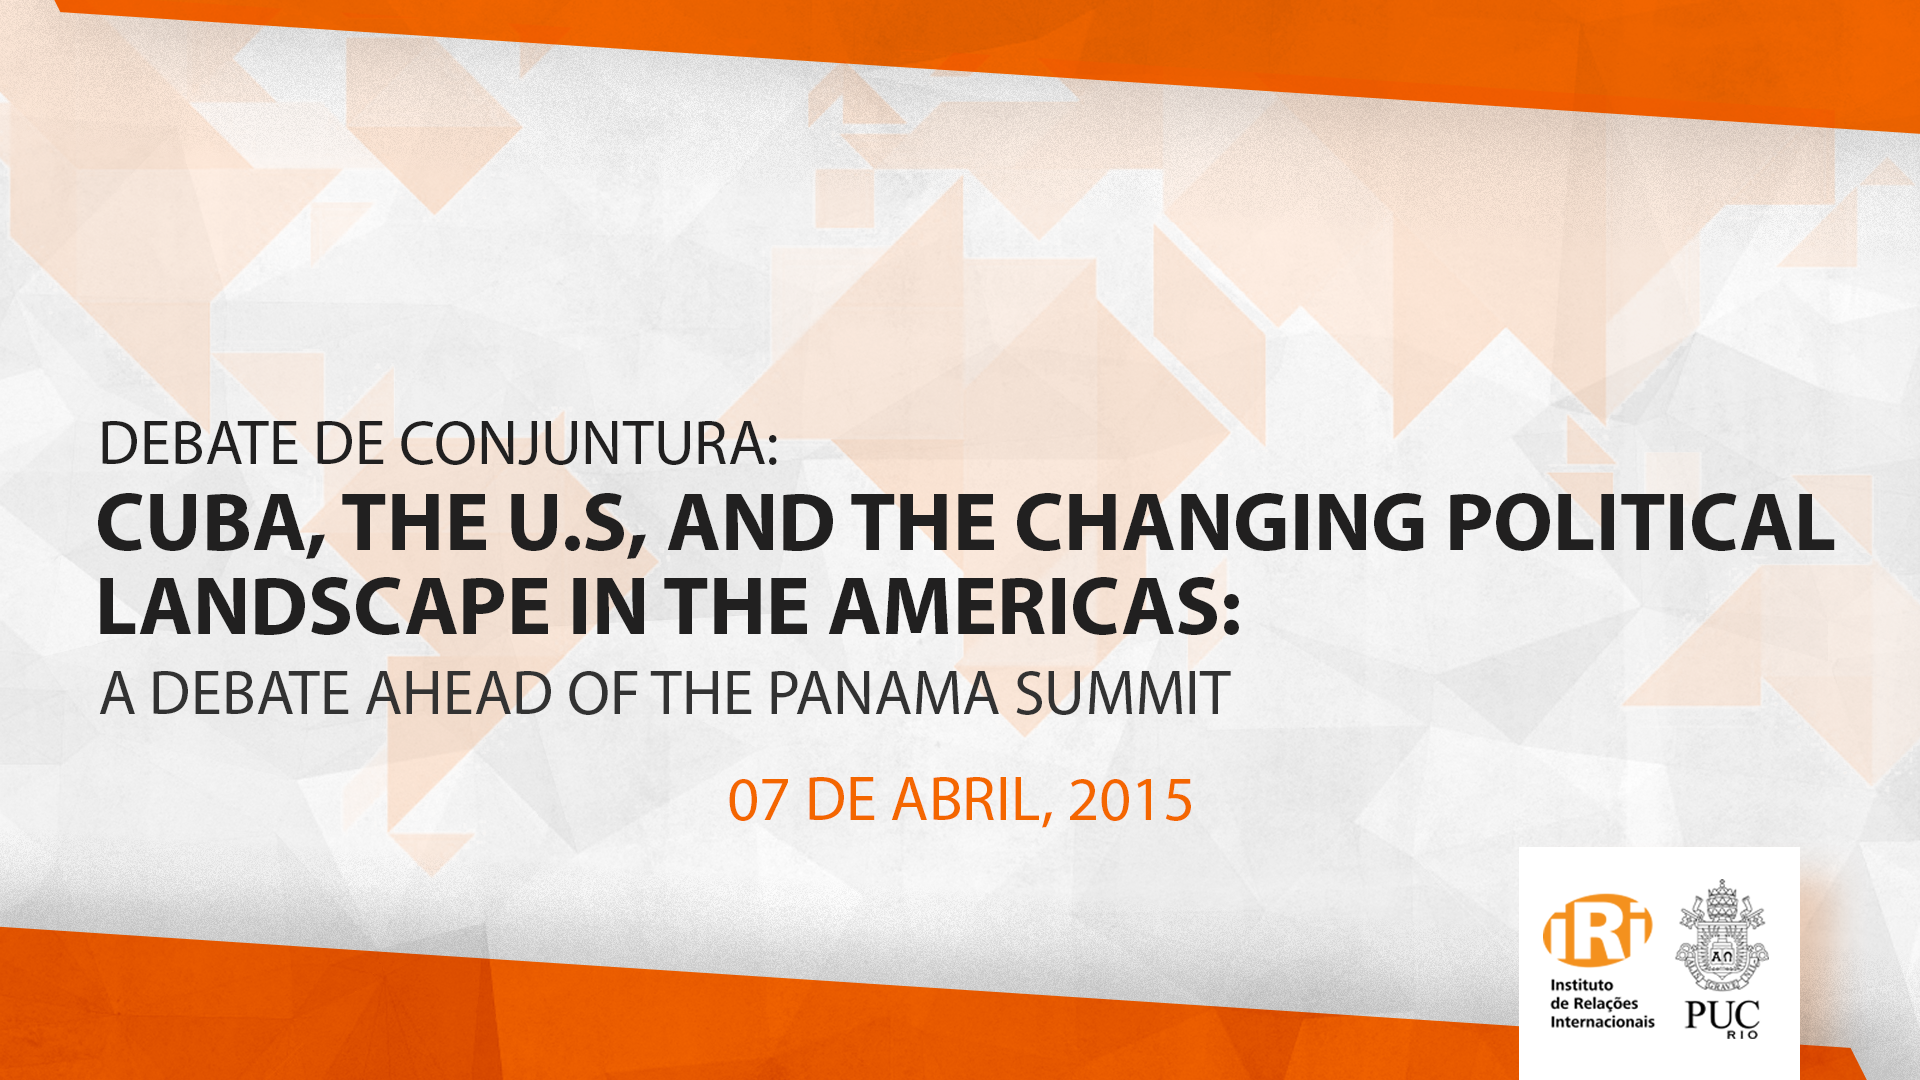 Cuba, the U.S, and the Changing Political Landscape in the Americas: a Debate Ahead of the Panama Summit